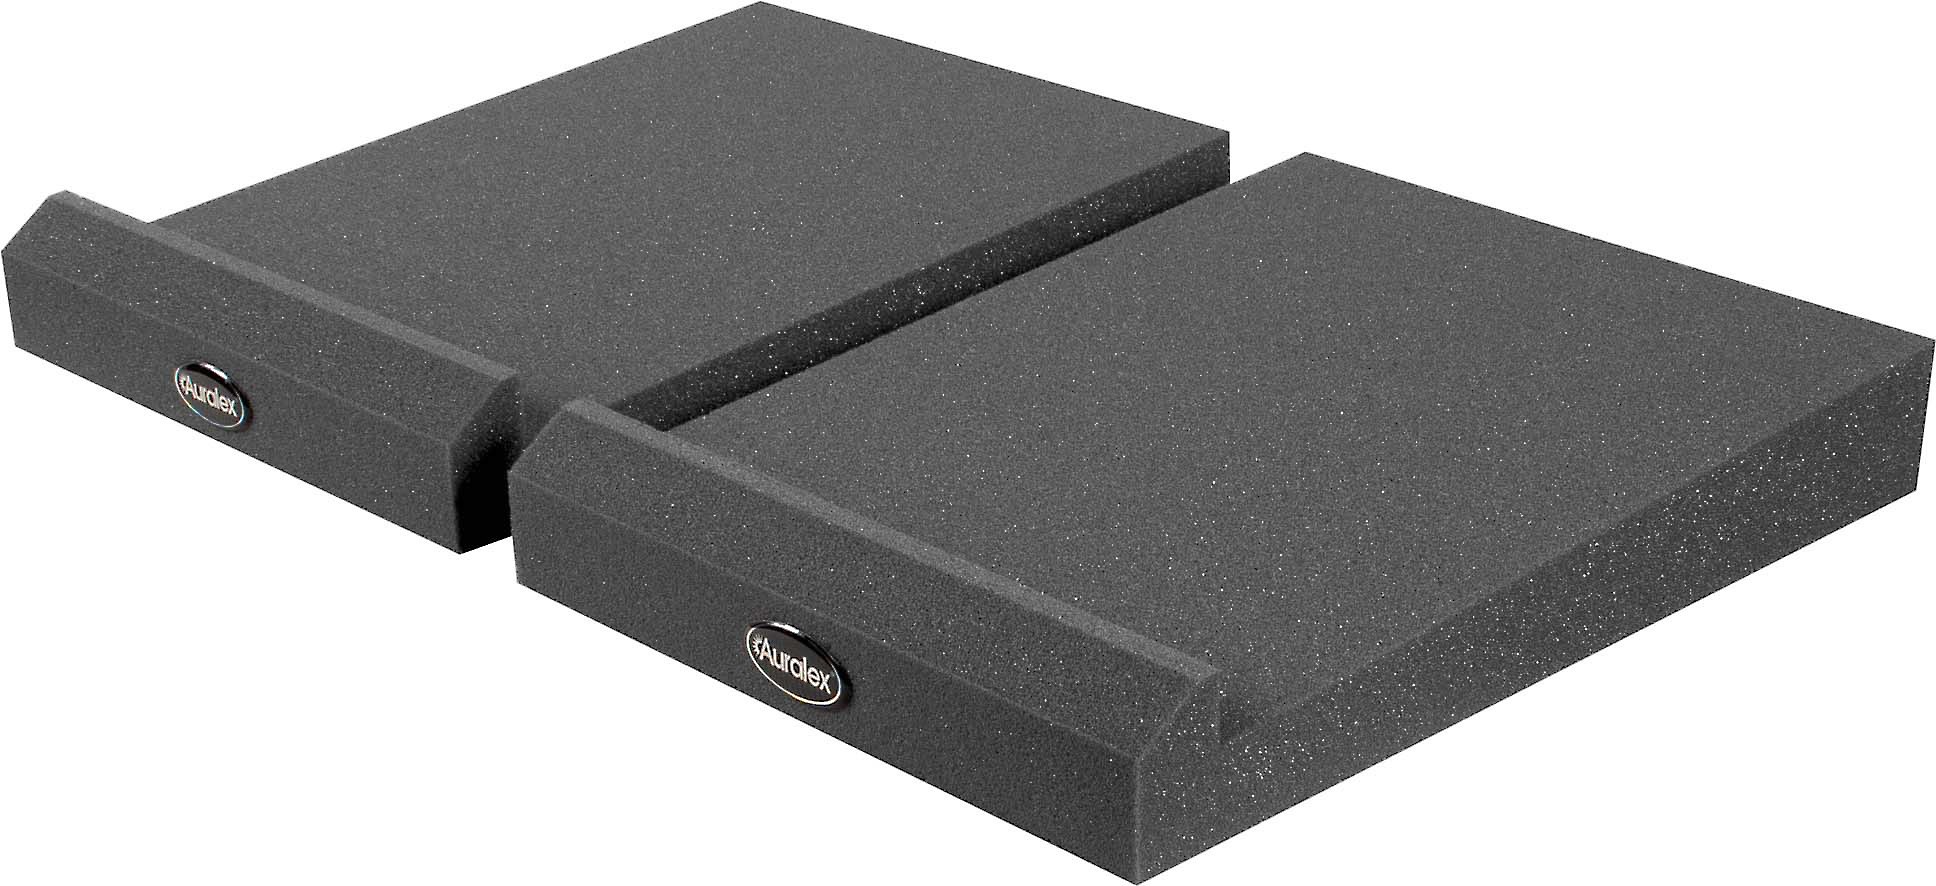 isolation pads for floor standing speakers